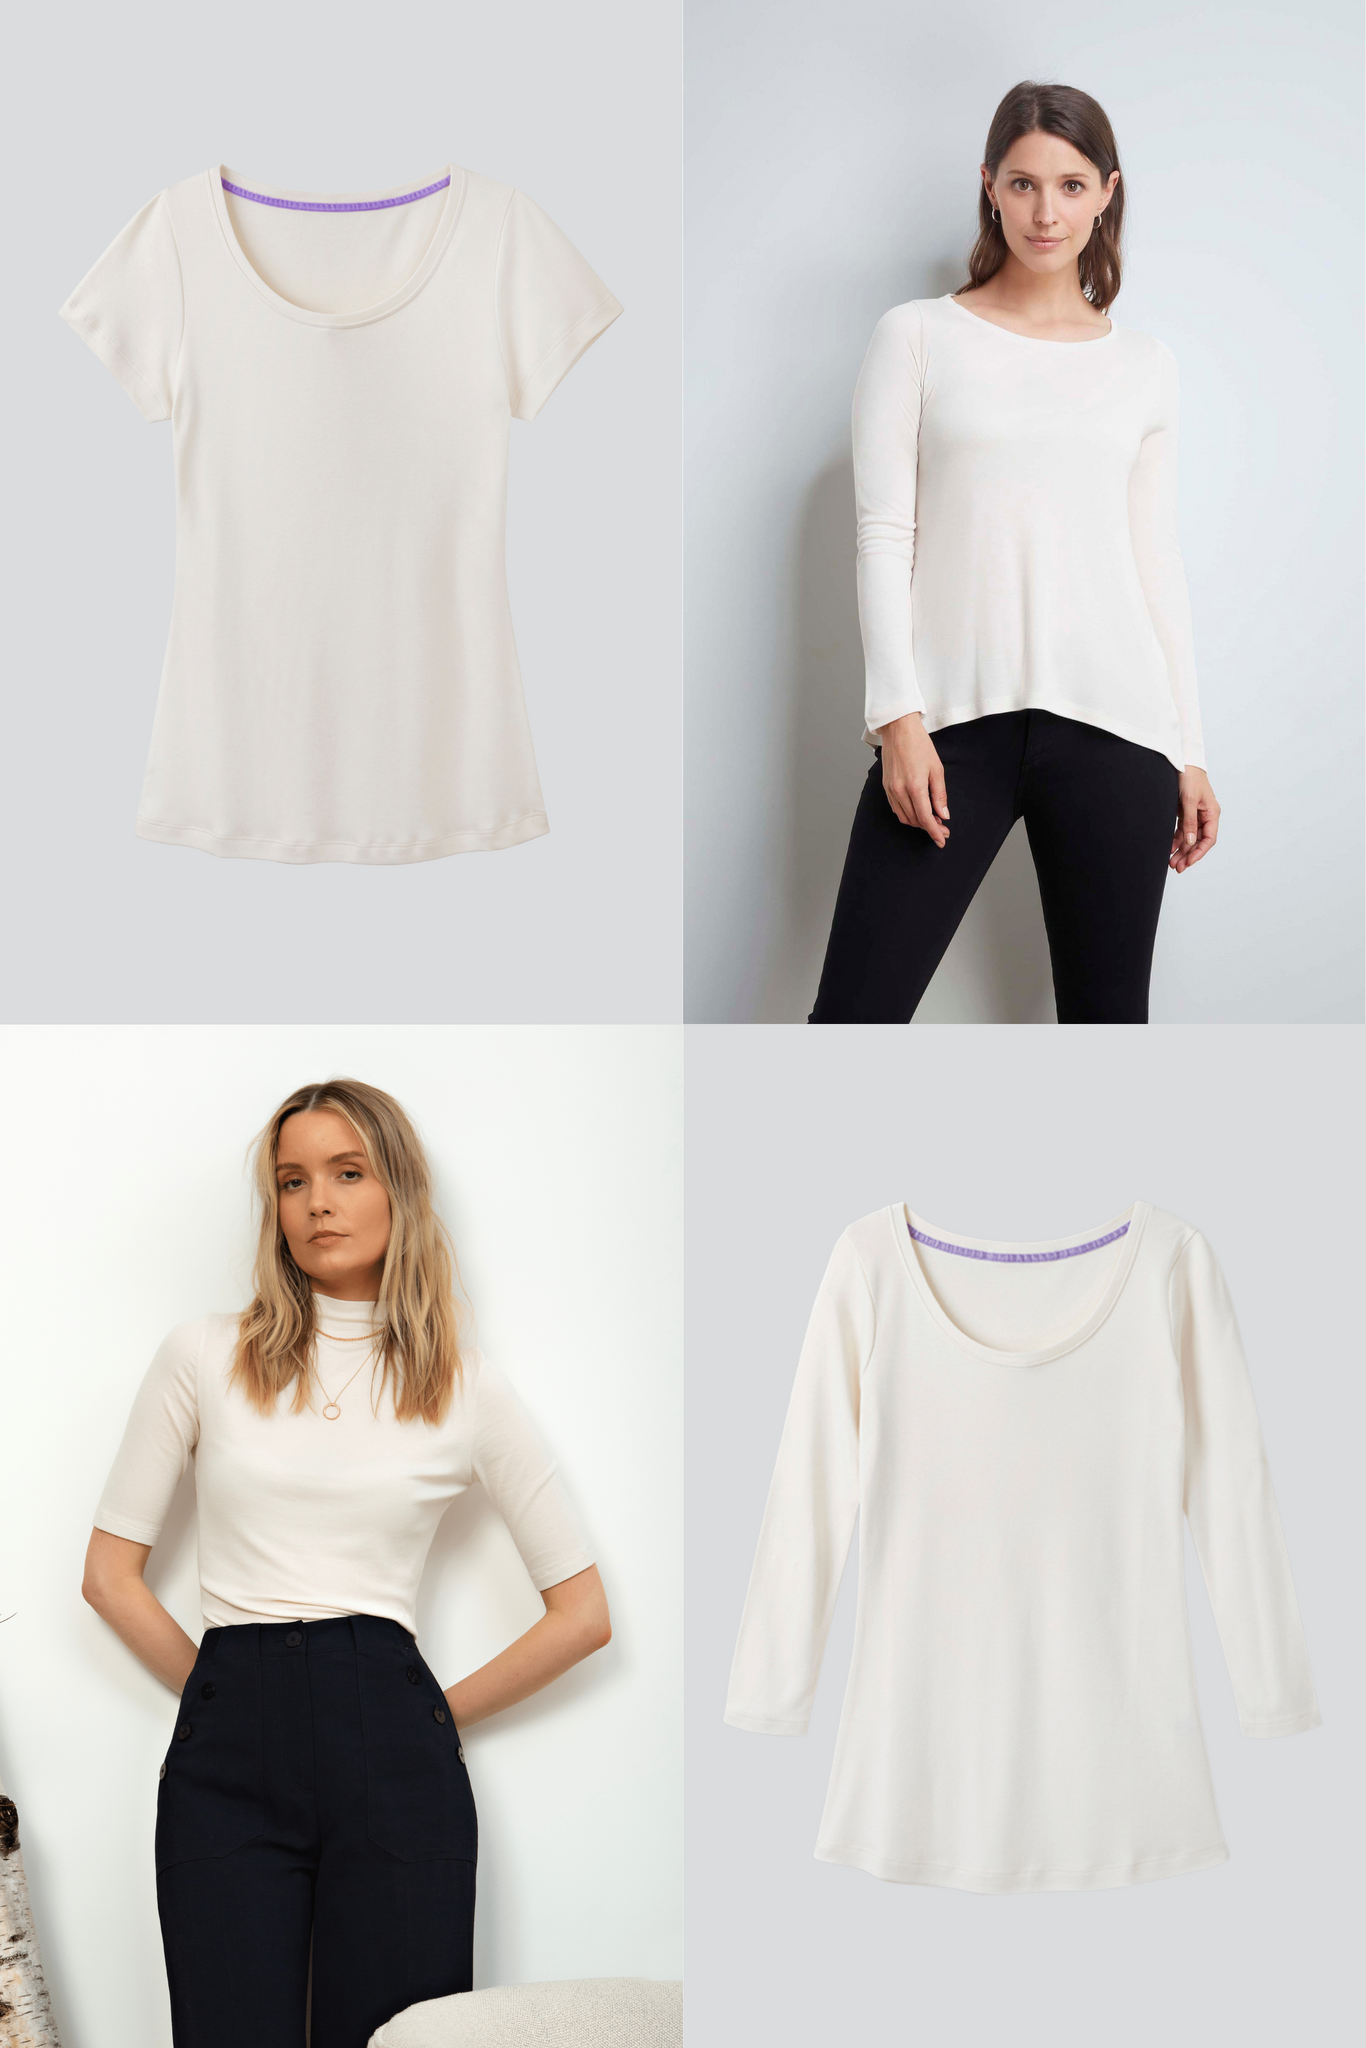 Lavender Hill Clothing Womenswear Off White T-Shirts